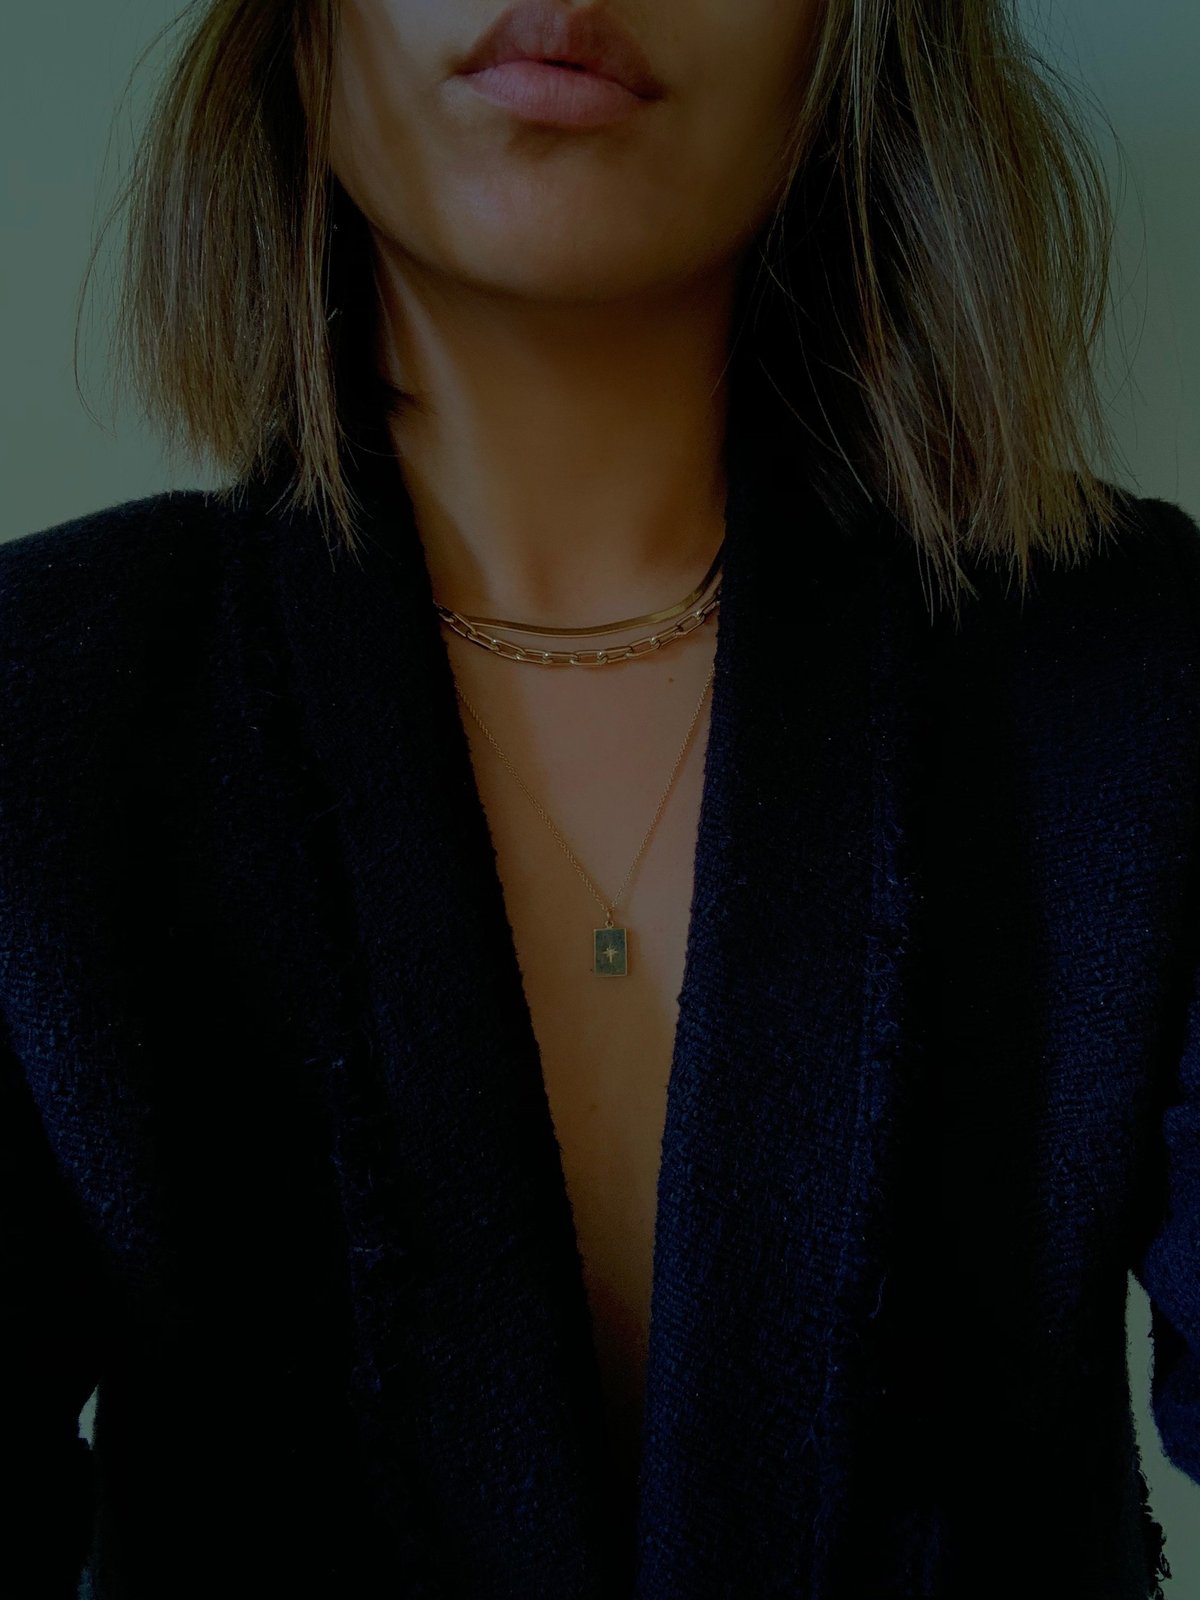 North Star Pendant Necklace, King + Curated